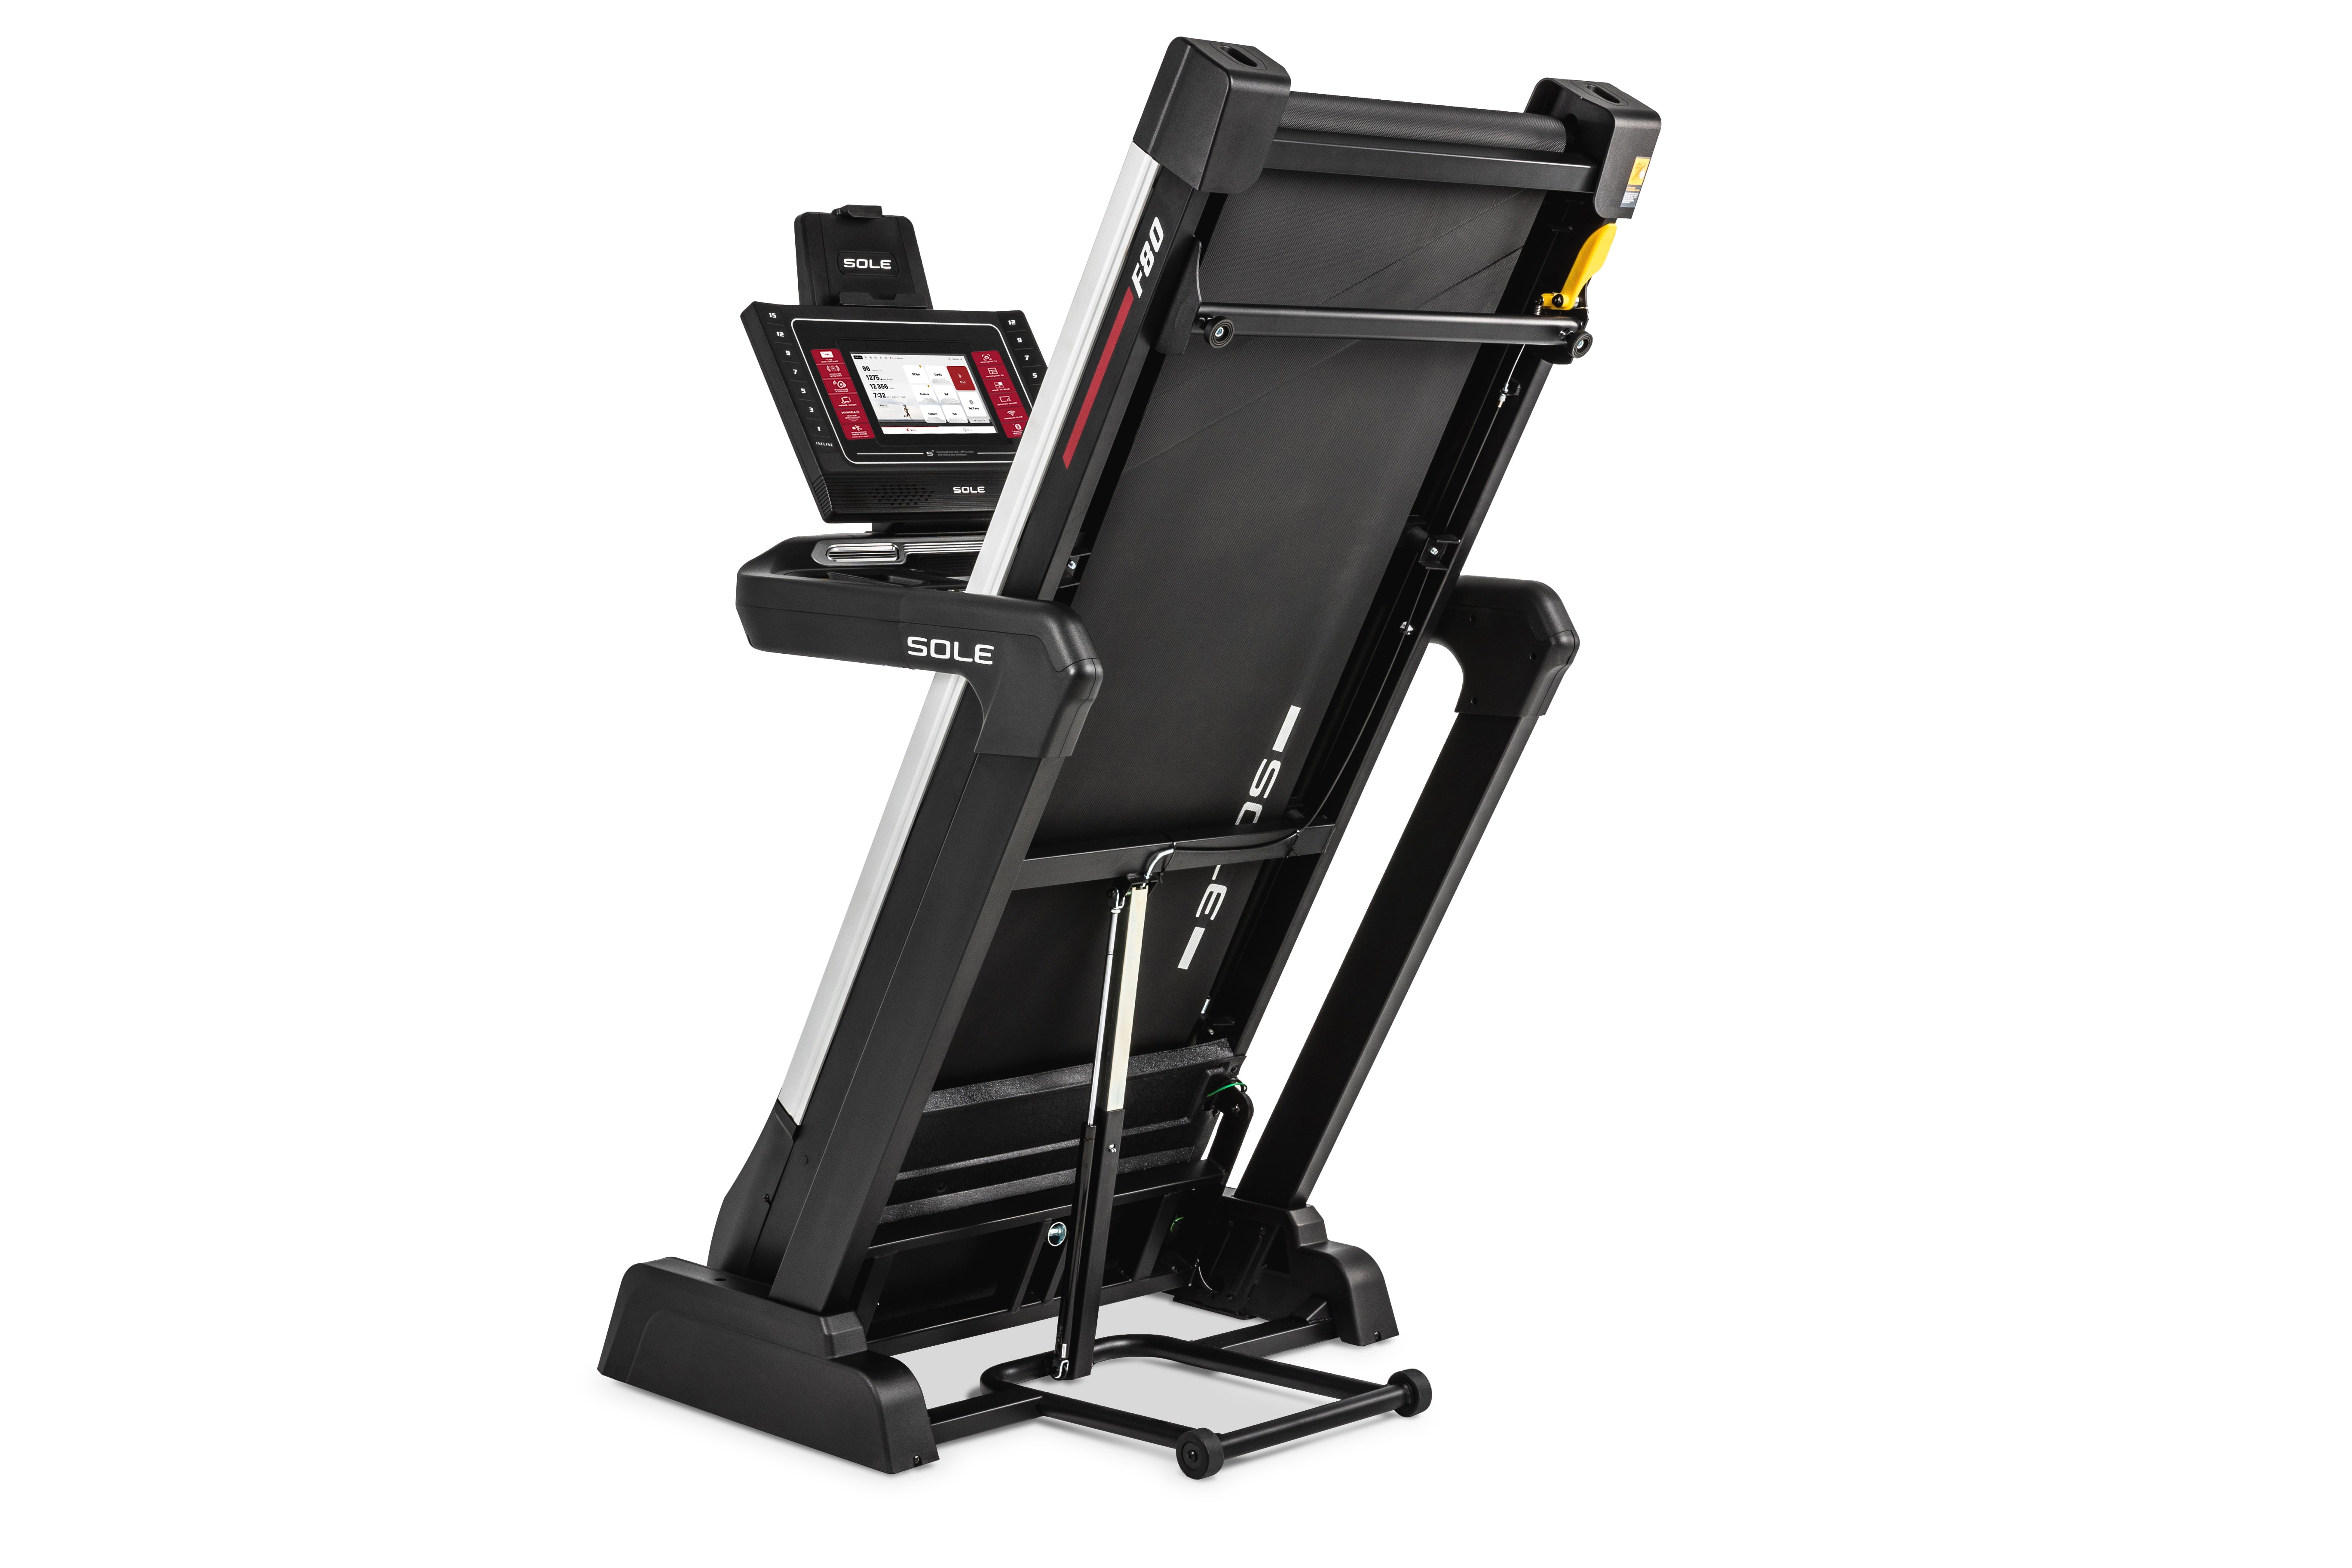 Side view of the Sole F80 treadmill in a folded position, featuring its digital touchscreen console, tablet holder, "F80" branding on the frame, and a secure yellow safety latch for storage.